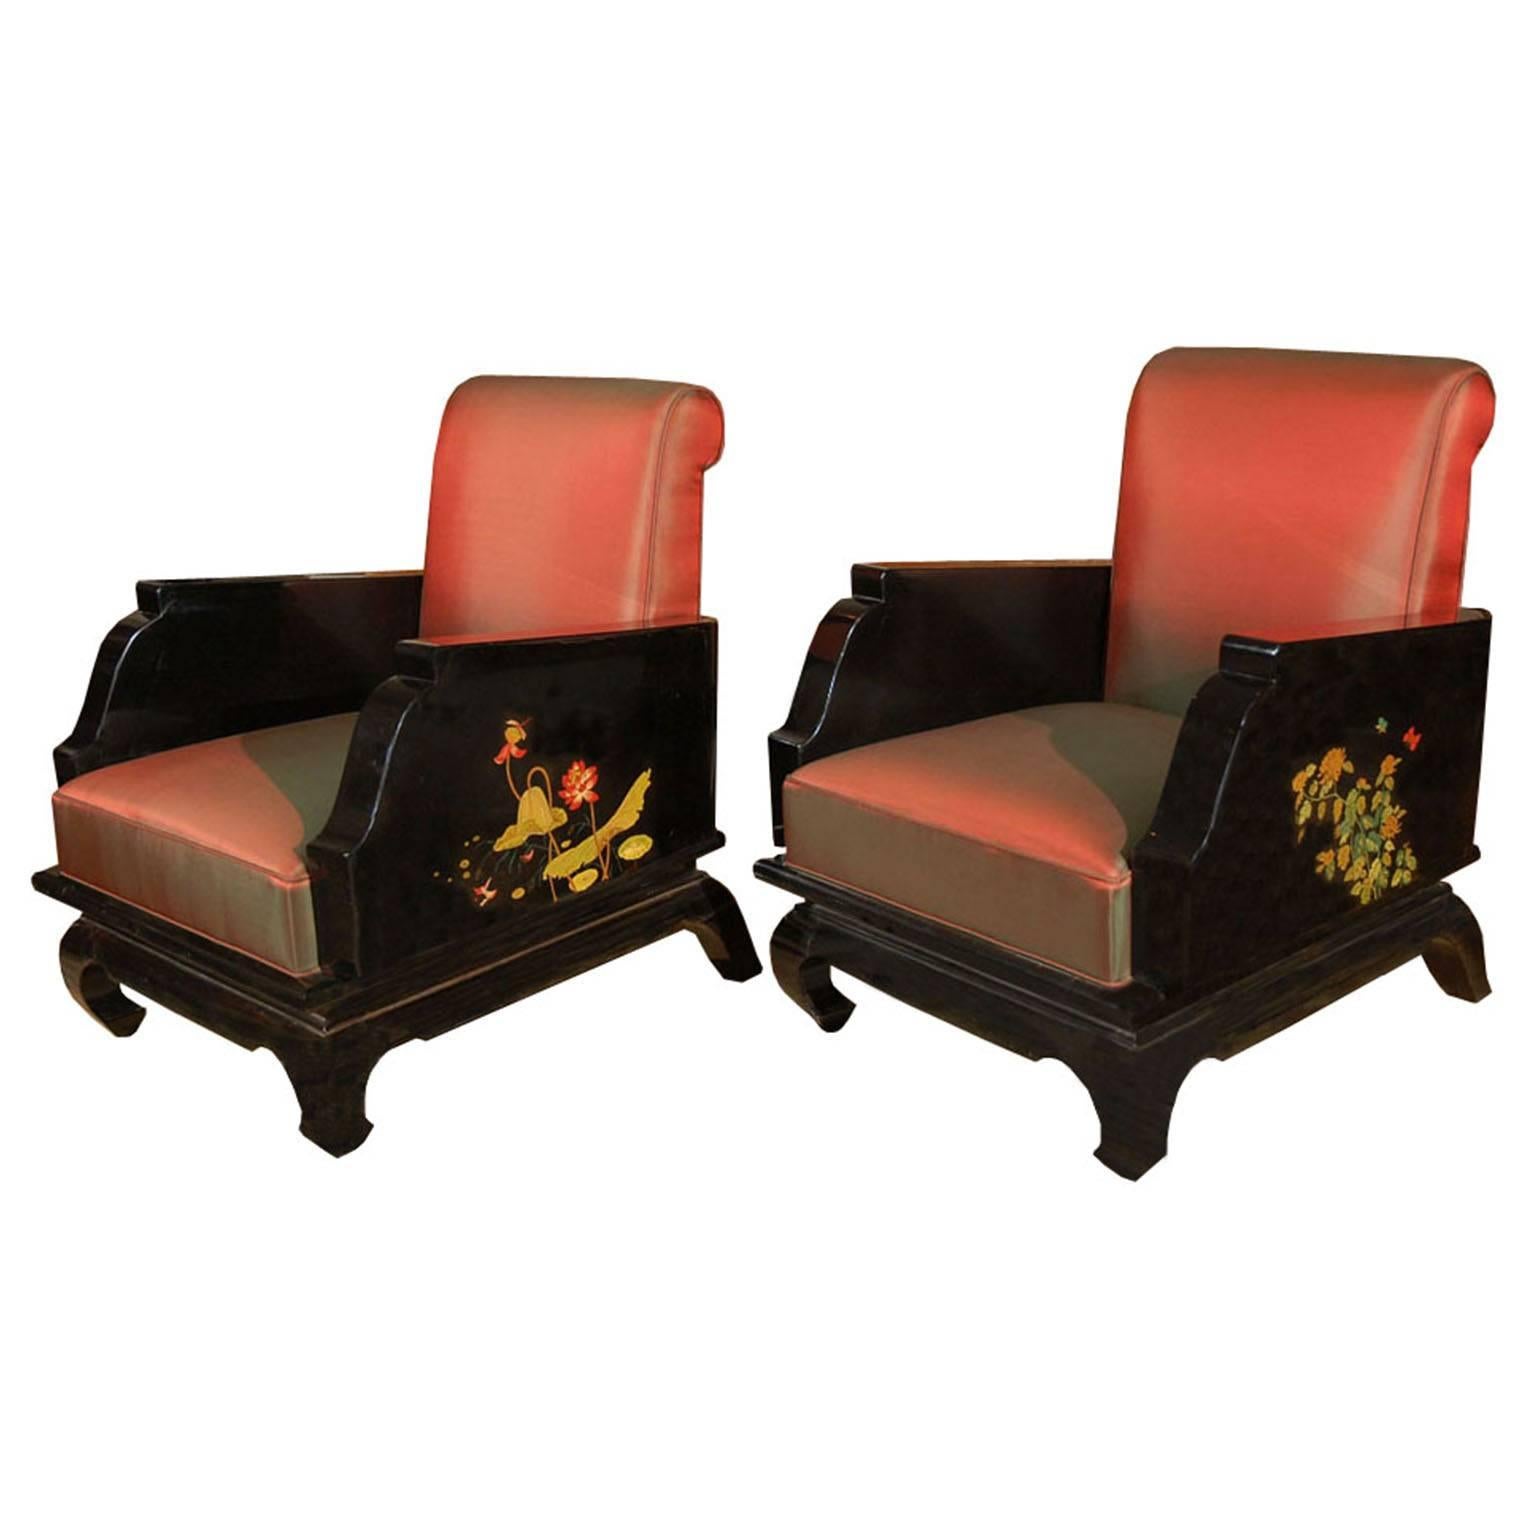 Pair of Hand-Painted Chinoiserie Armchairs